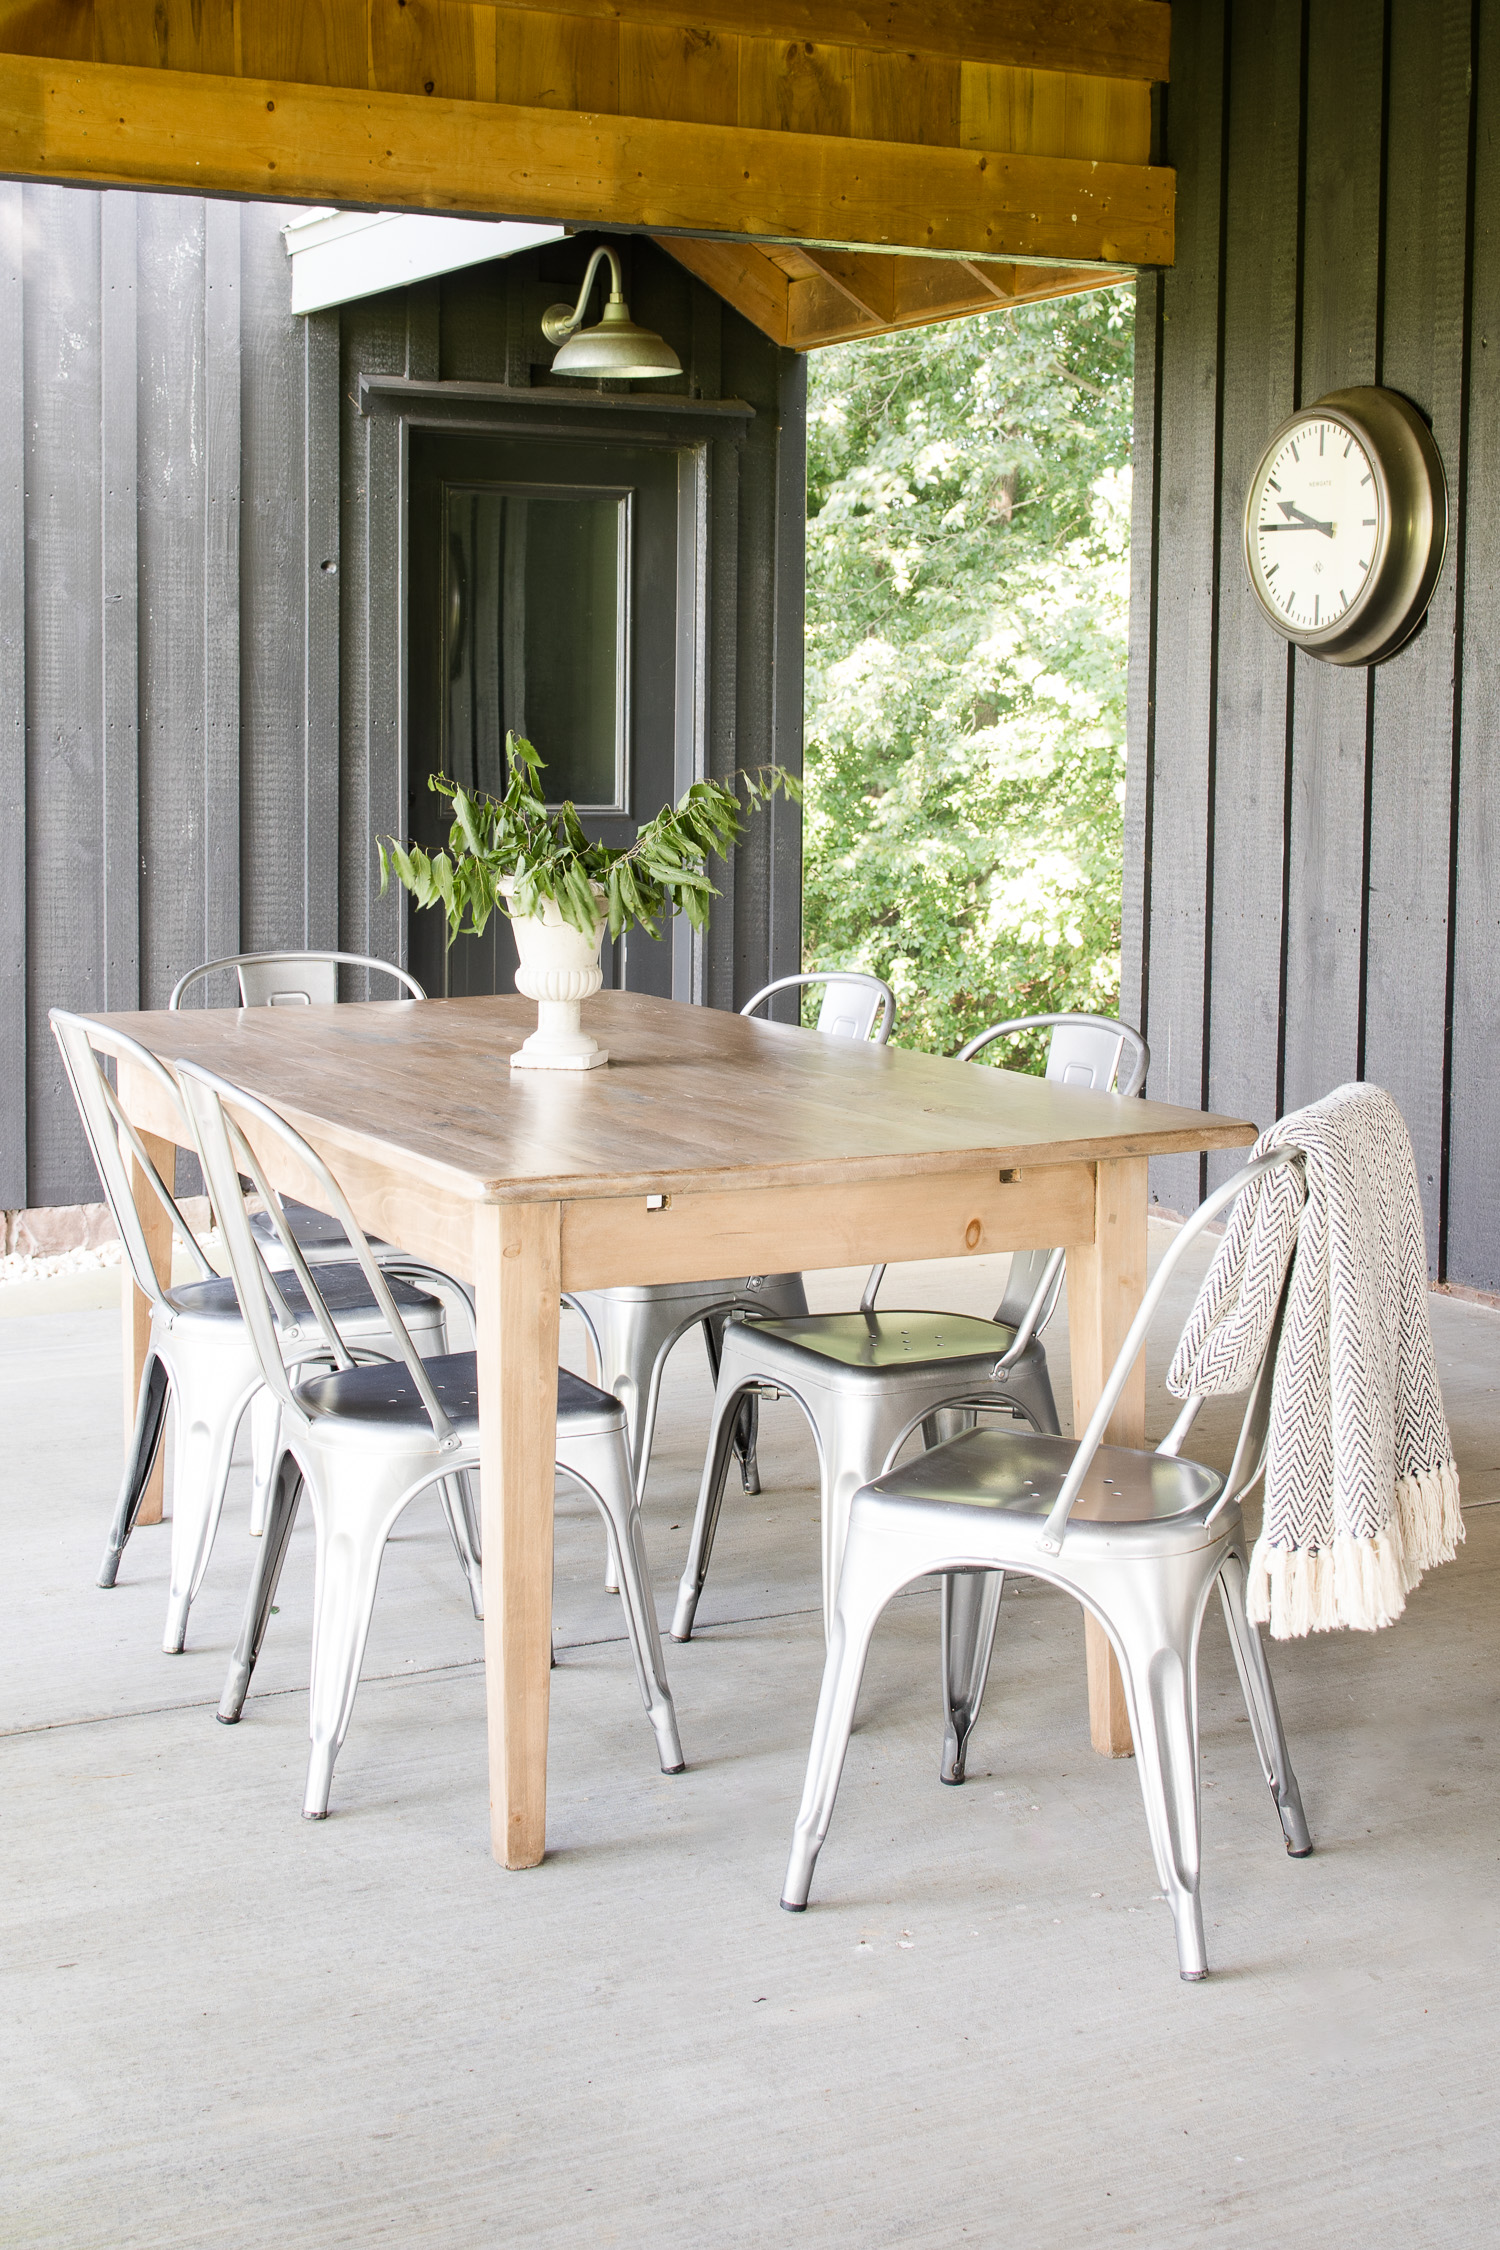 barn patio with light wood table, silver chairs